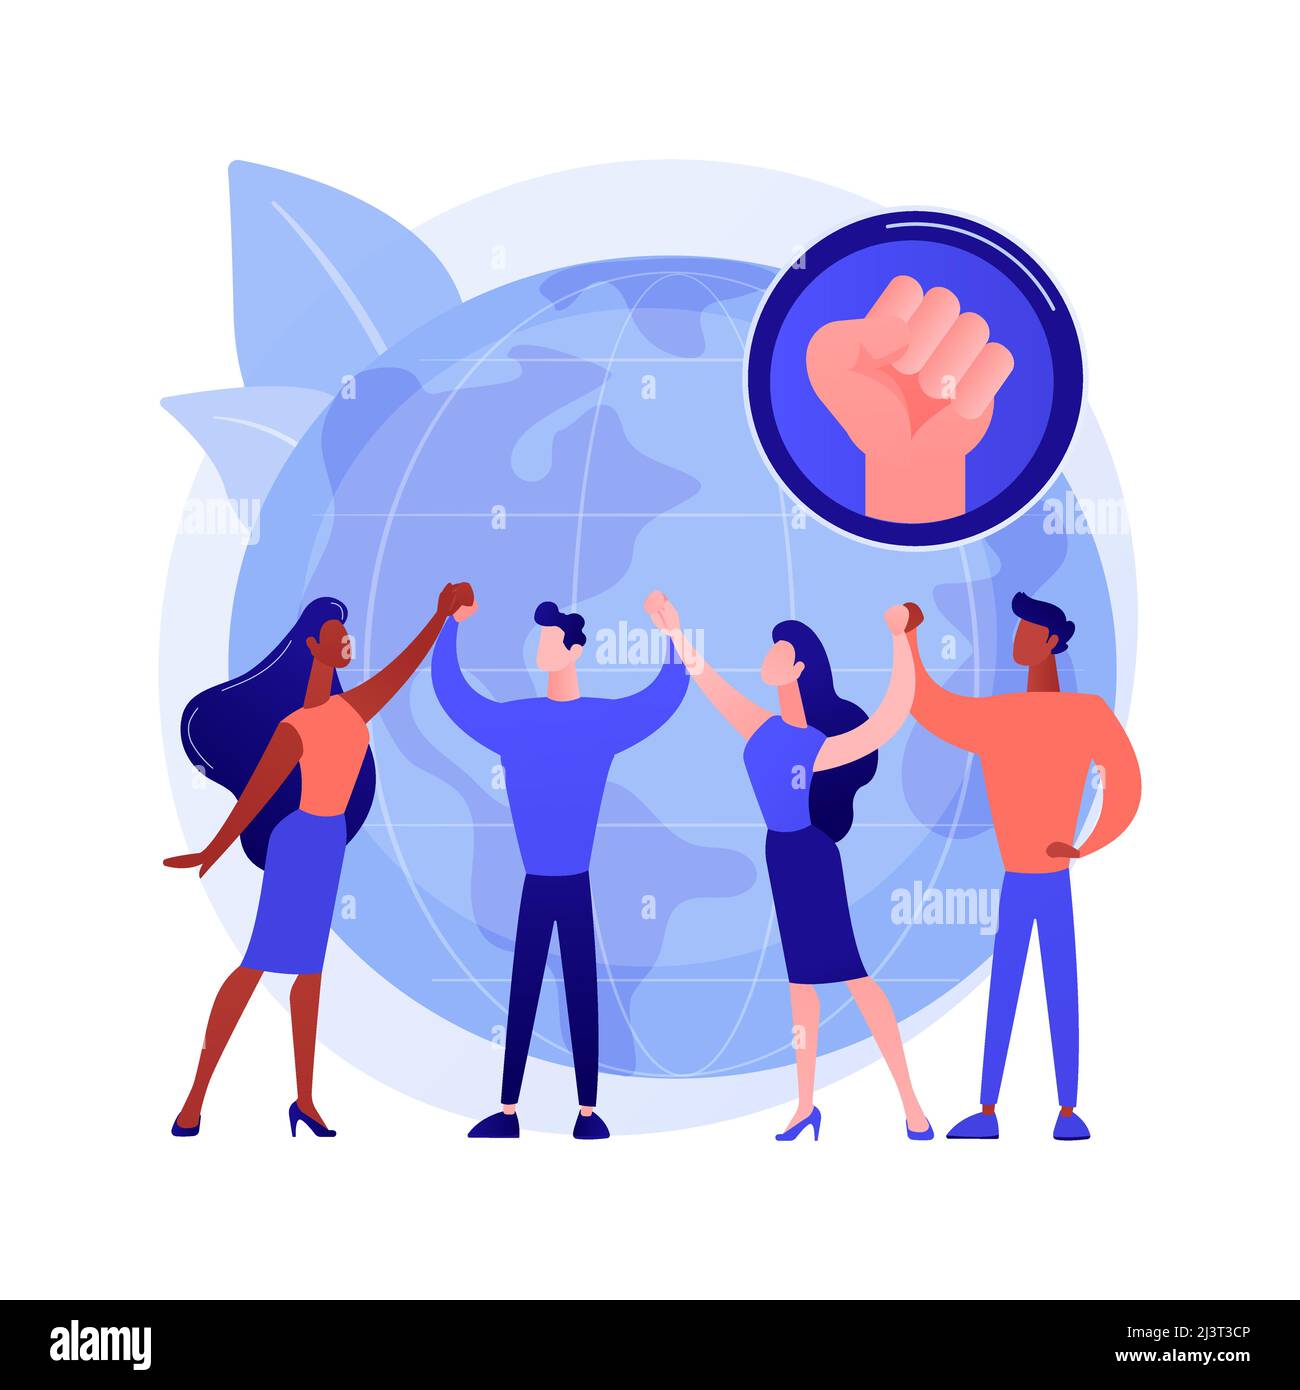 Youth empowerment abstract concept vector illustration. Children and young people take charge, take action, improve life quality, democracy building, Stock Vector